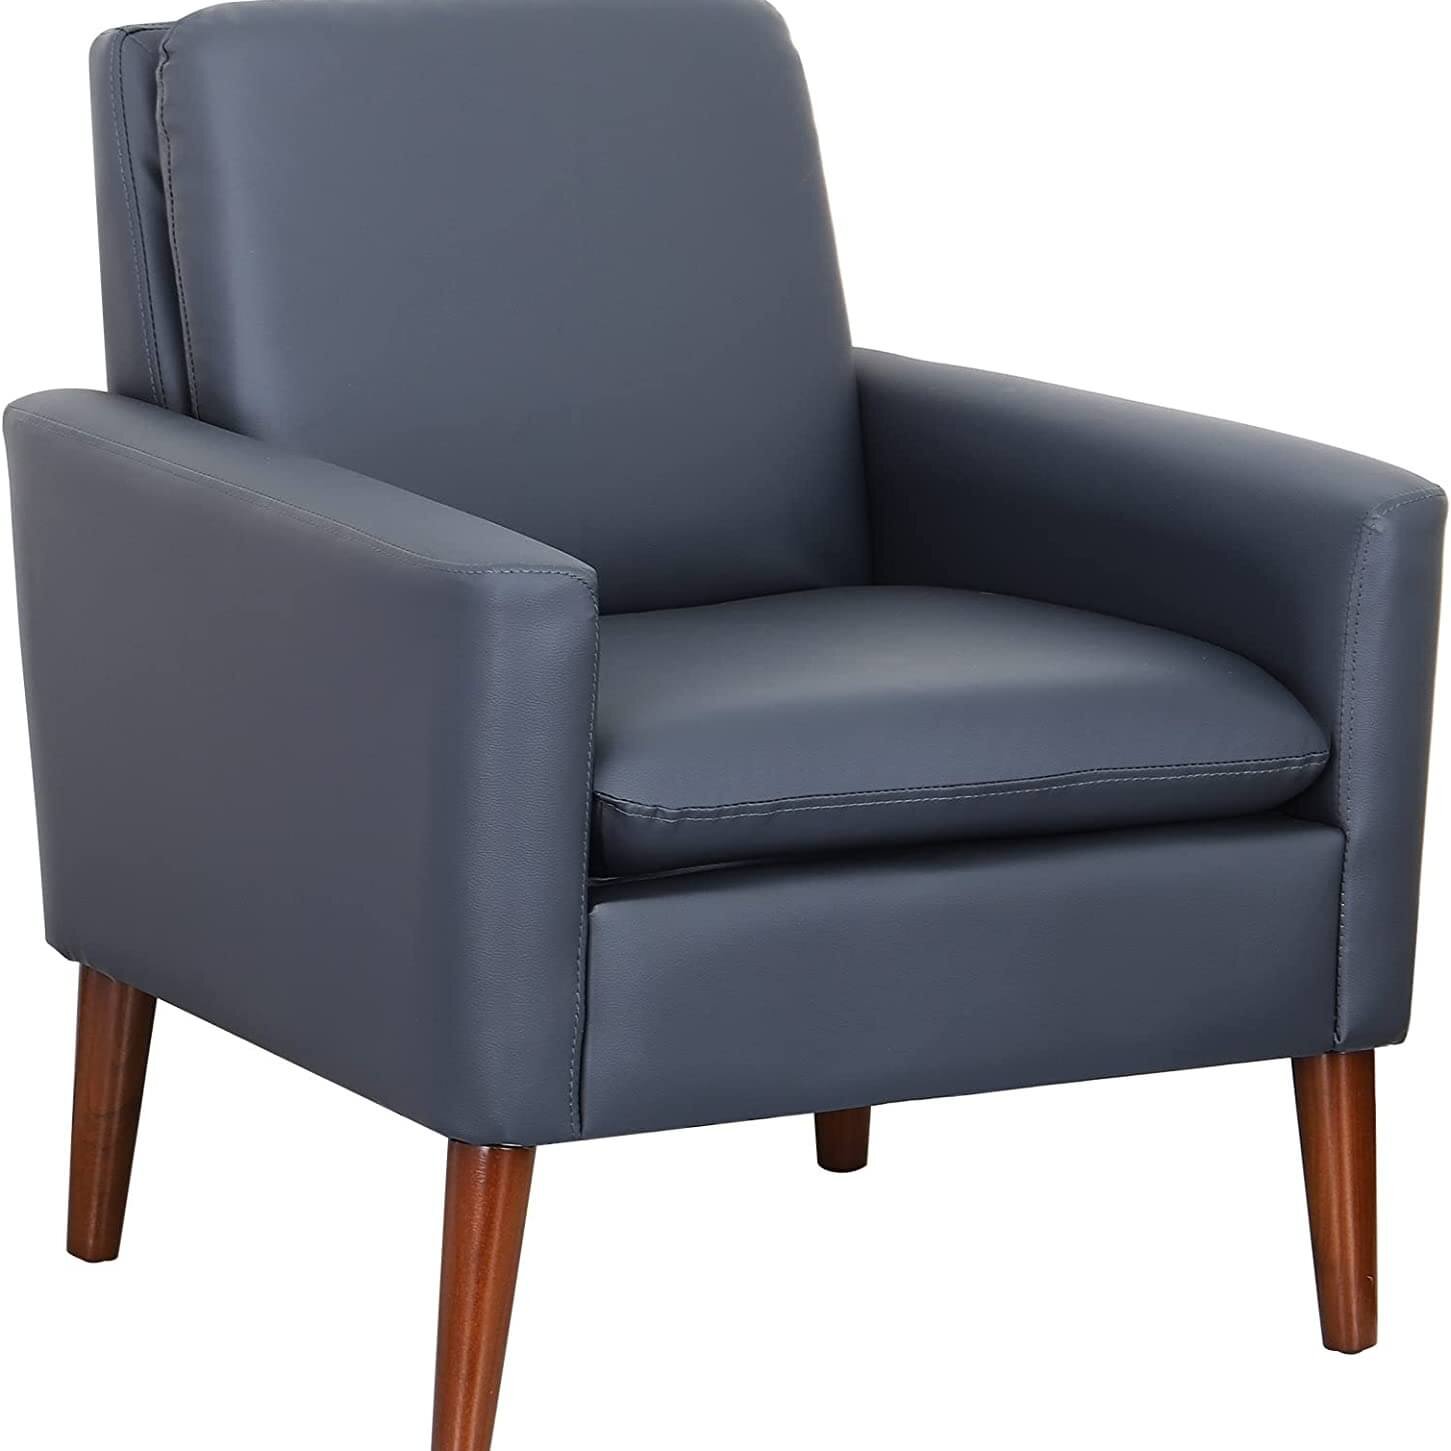 We're thinking of adding the Lohoms accent chairs from #Amazon to our inventory - but we can't decide which color to get. So, were letting you decide for us. 

Green
Blue Marine Leather
Both

Should we get green or blue leather?
#PPFYnewInventory #he